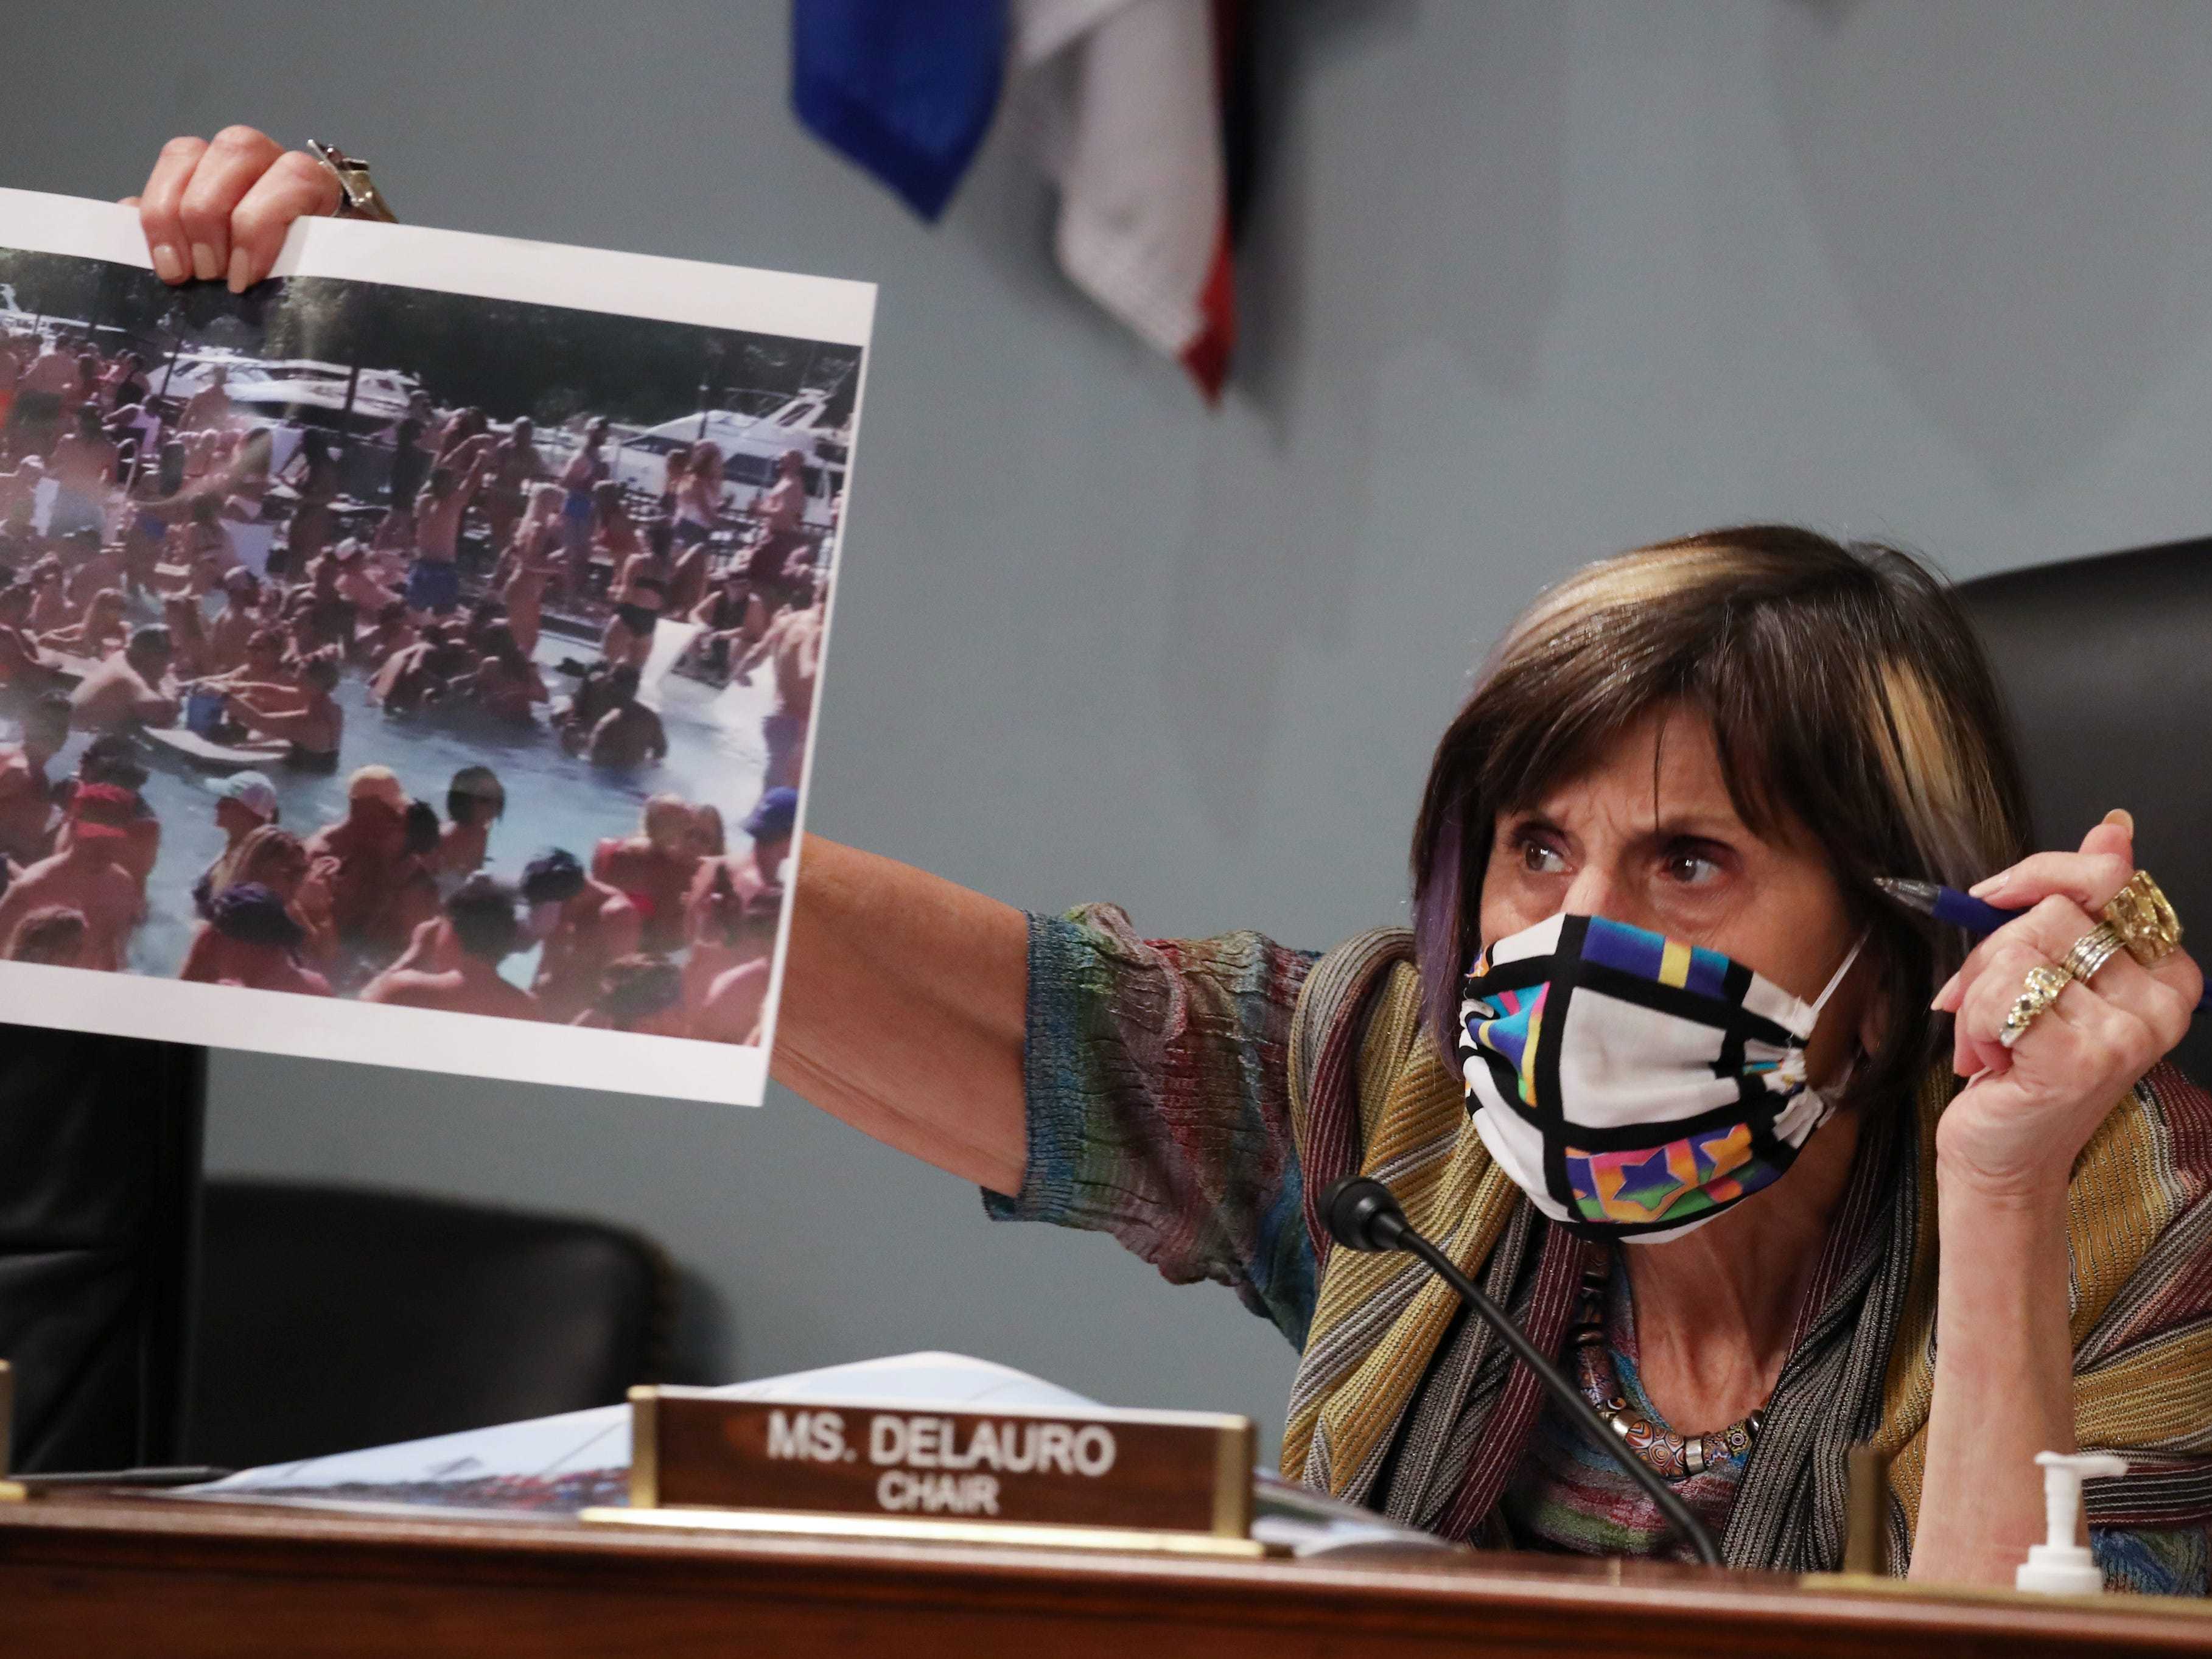 Chairwoman Rosa DeLauro wears a protective mask as she speaks at a hearing on COVID-19 response held by the House subcommittee on Labor, Health and Human Services, Education, and Related Agencies, on Capitol Hill in Washington, D.C., U.S., June 4, 2020. Tasos Katopodis/Pool via REUTERS